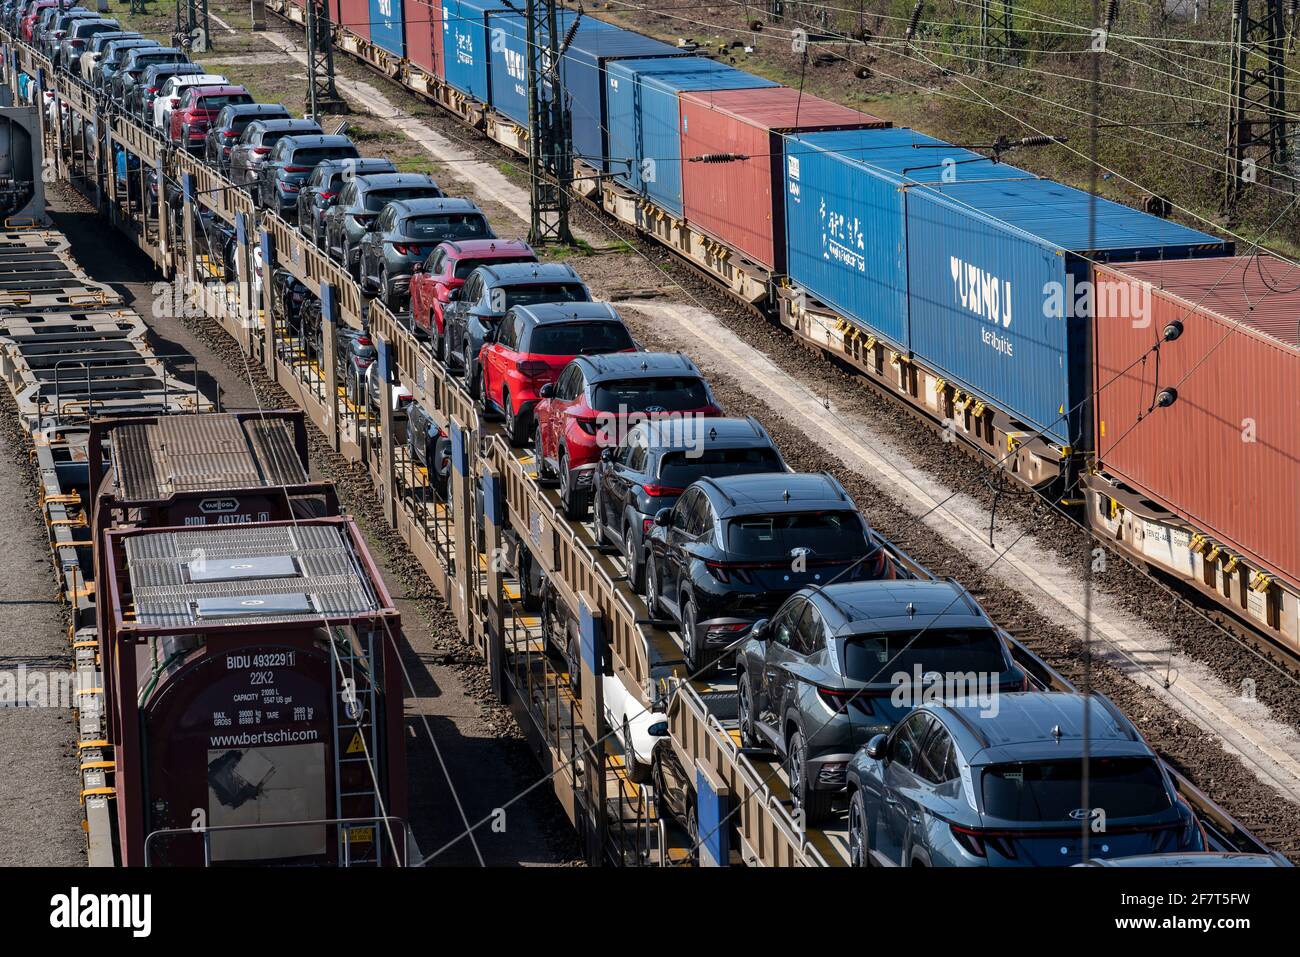 Duisburg-Rheinhausen freight station, at the Logport port area, goods trains loaded with new cars, various tank containers and the container train fro Stock Photo